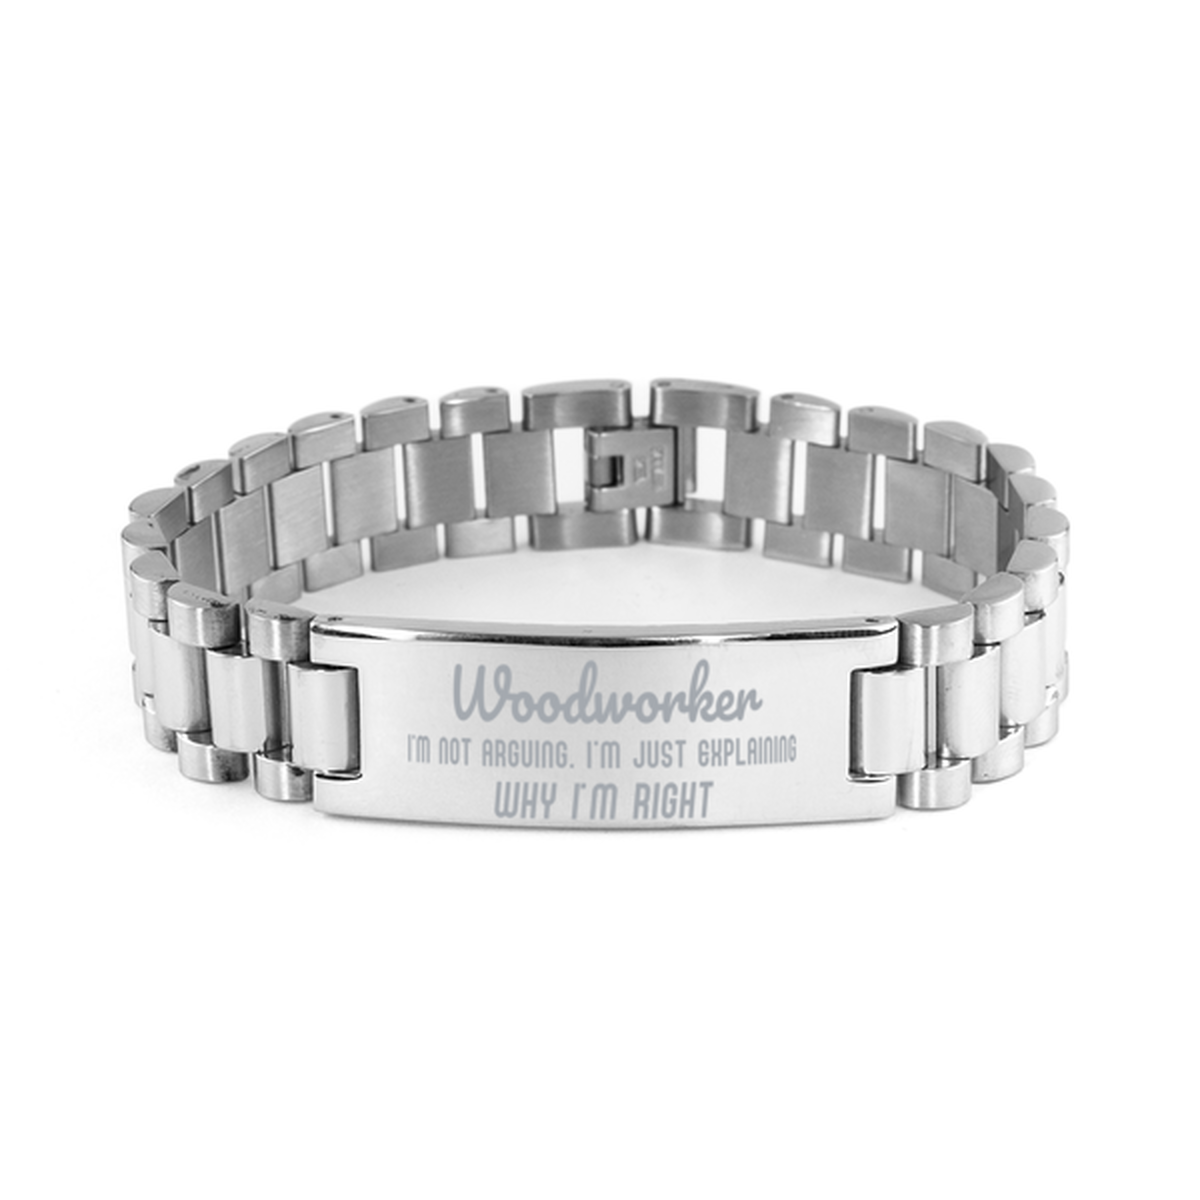 Woodworker I'm not Arguing. I'm Just Explaining Why I'm RIGHT Ladder Stainless Steel Bracelet, Graduation Birthday Christmas Woodworker Gifts For Woodworker Funny Saying Quote Present for Men Women Coworker